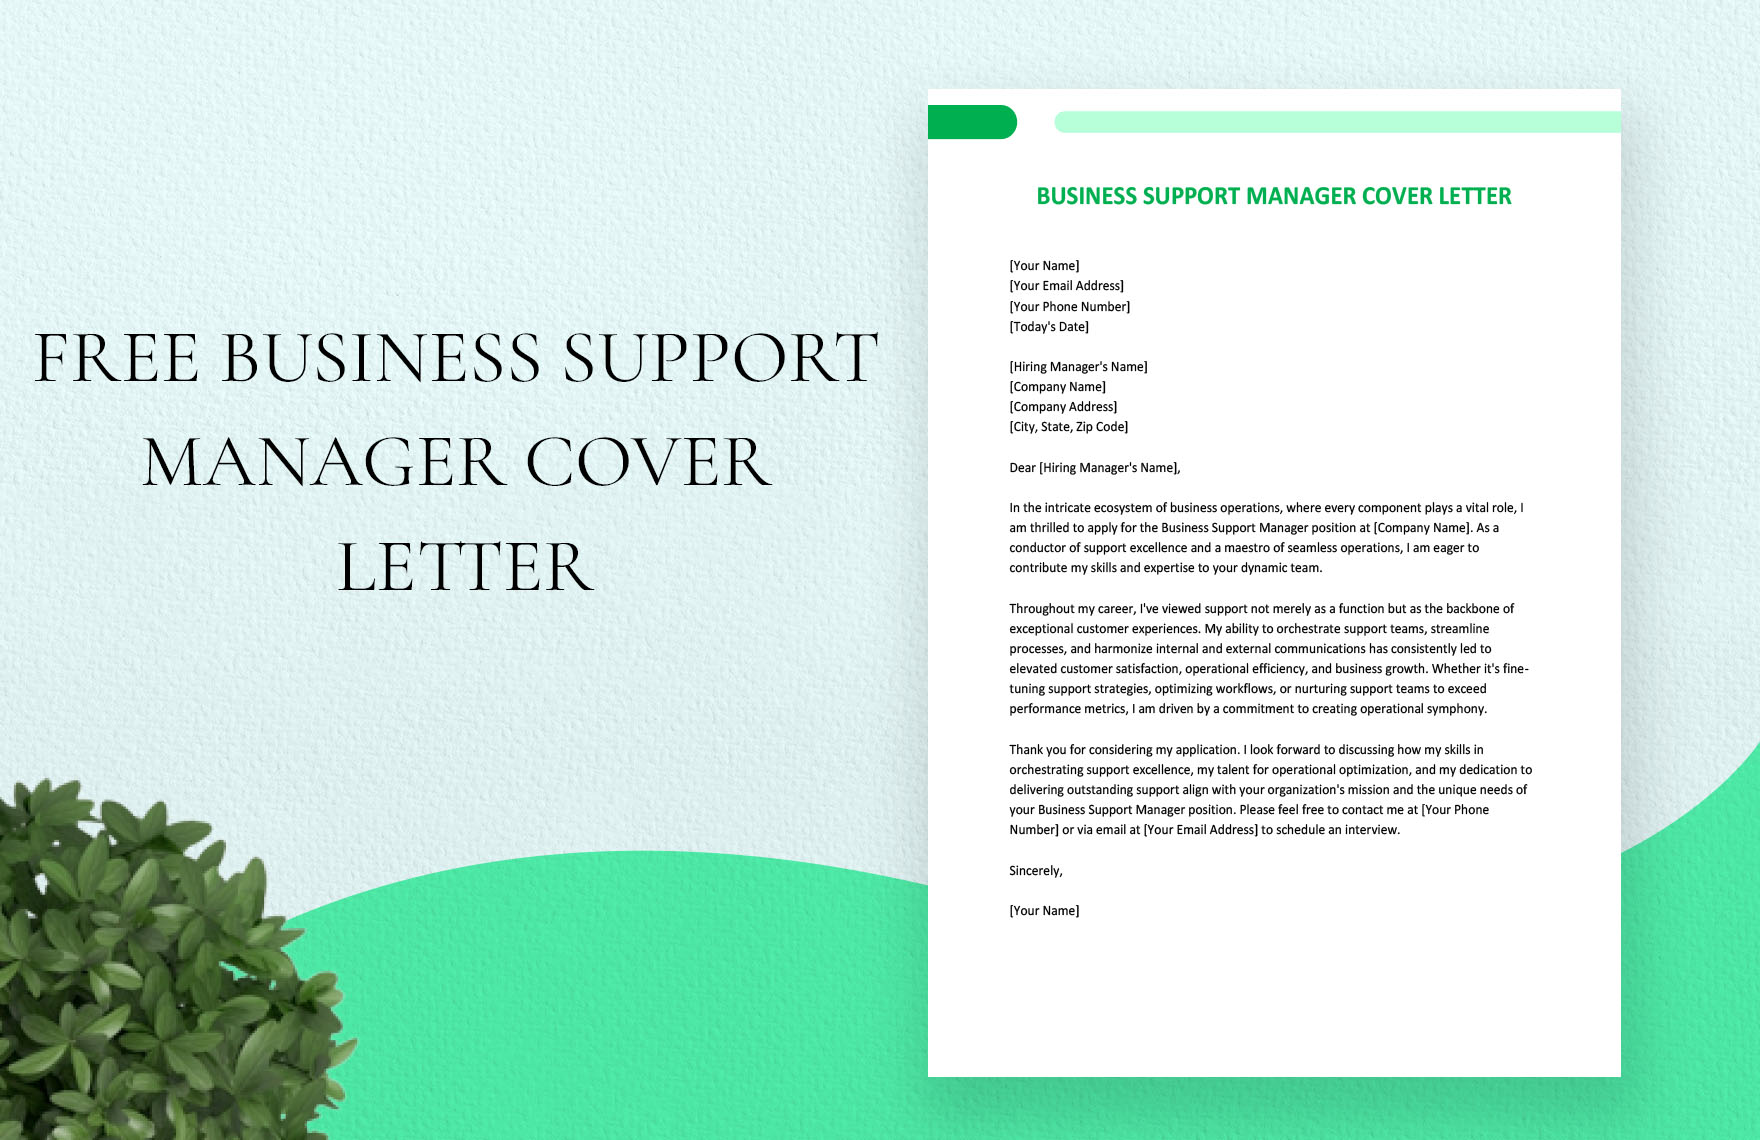 Business Support Manager Cover Letter